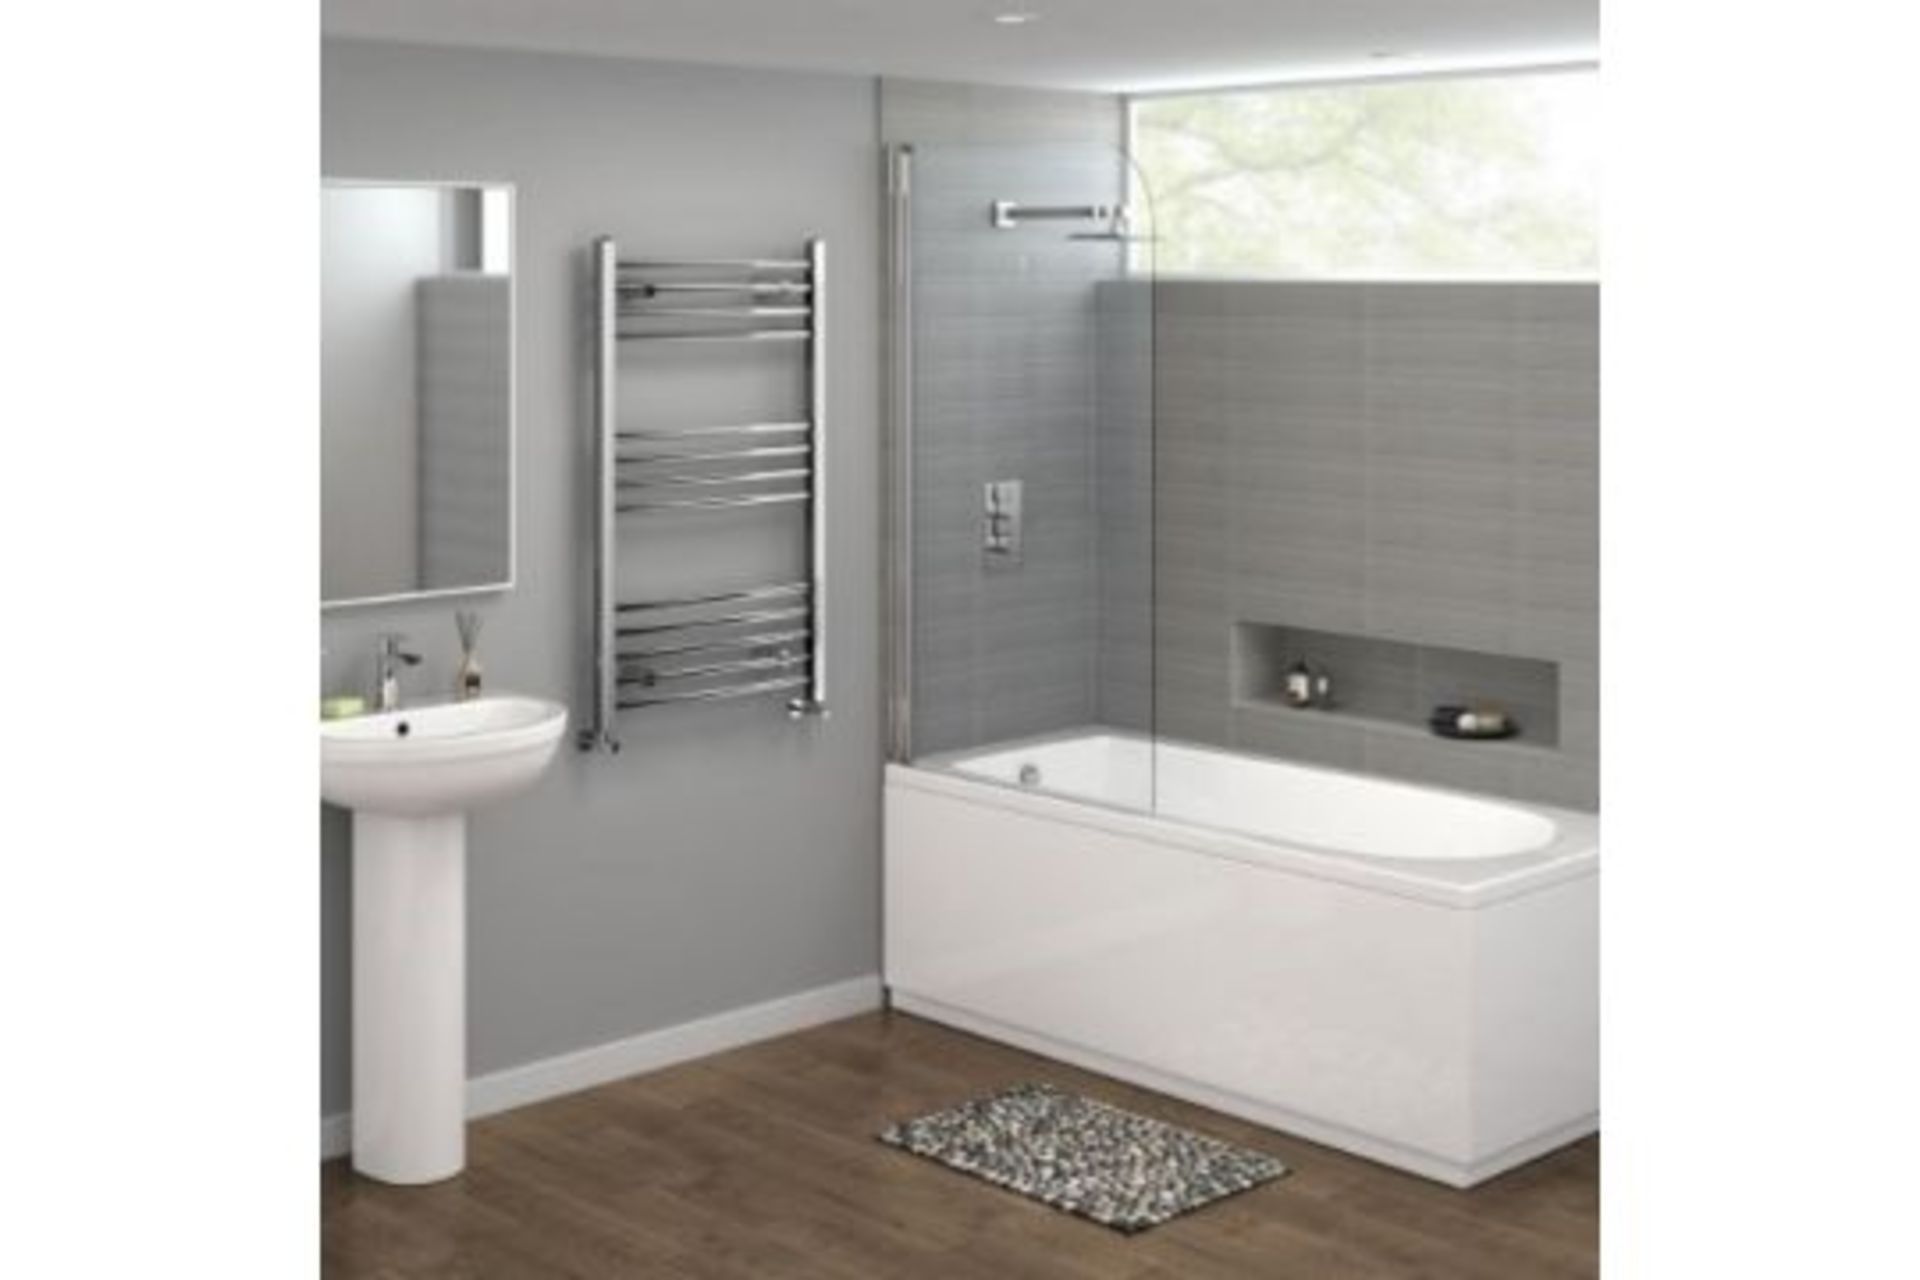 NEW & BOXED 1200x500mm - 20mm Tubes - RRP £219.99.Chrome Curved Rail Ladder Towel Radiator.Our Nancy - Image 2 of 2